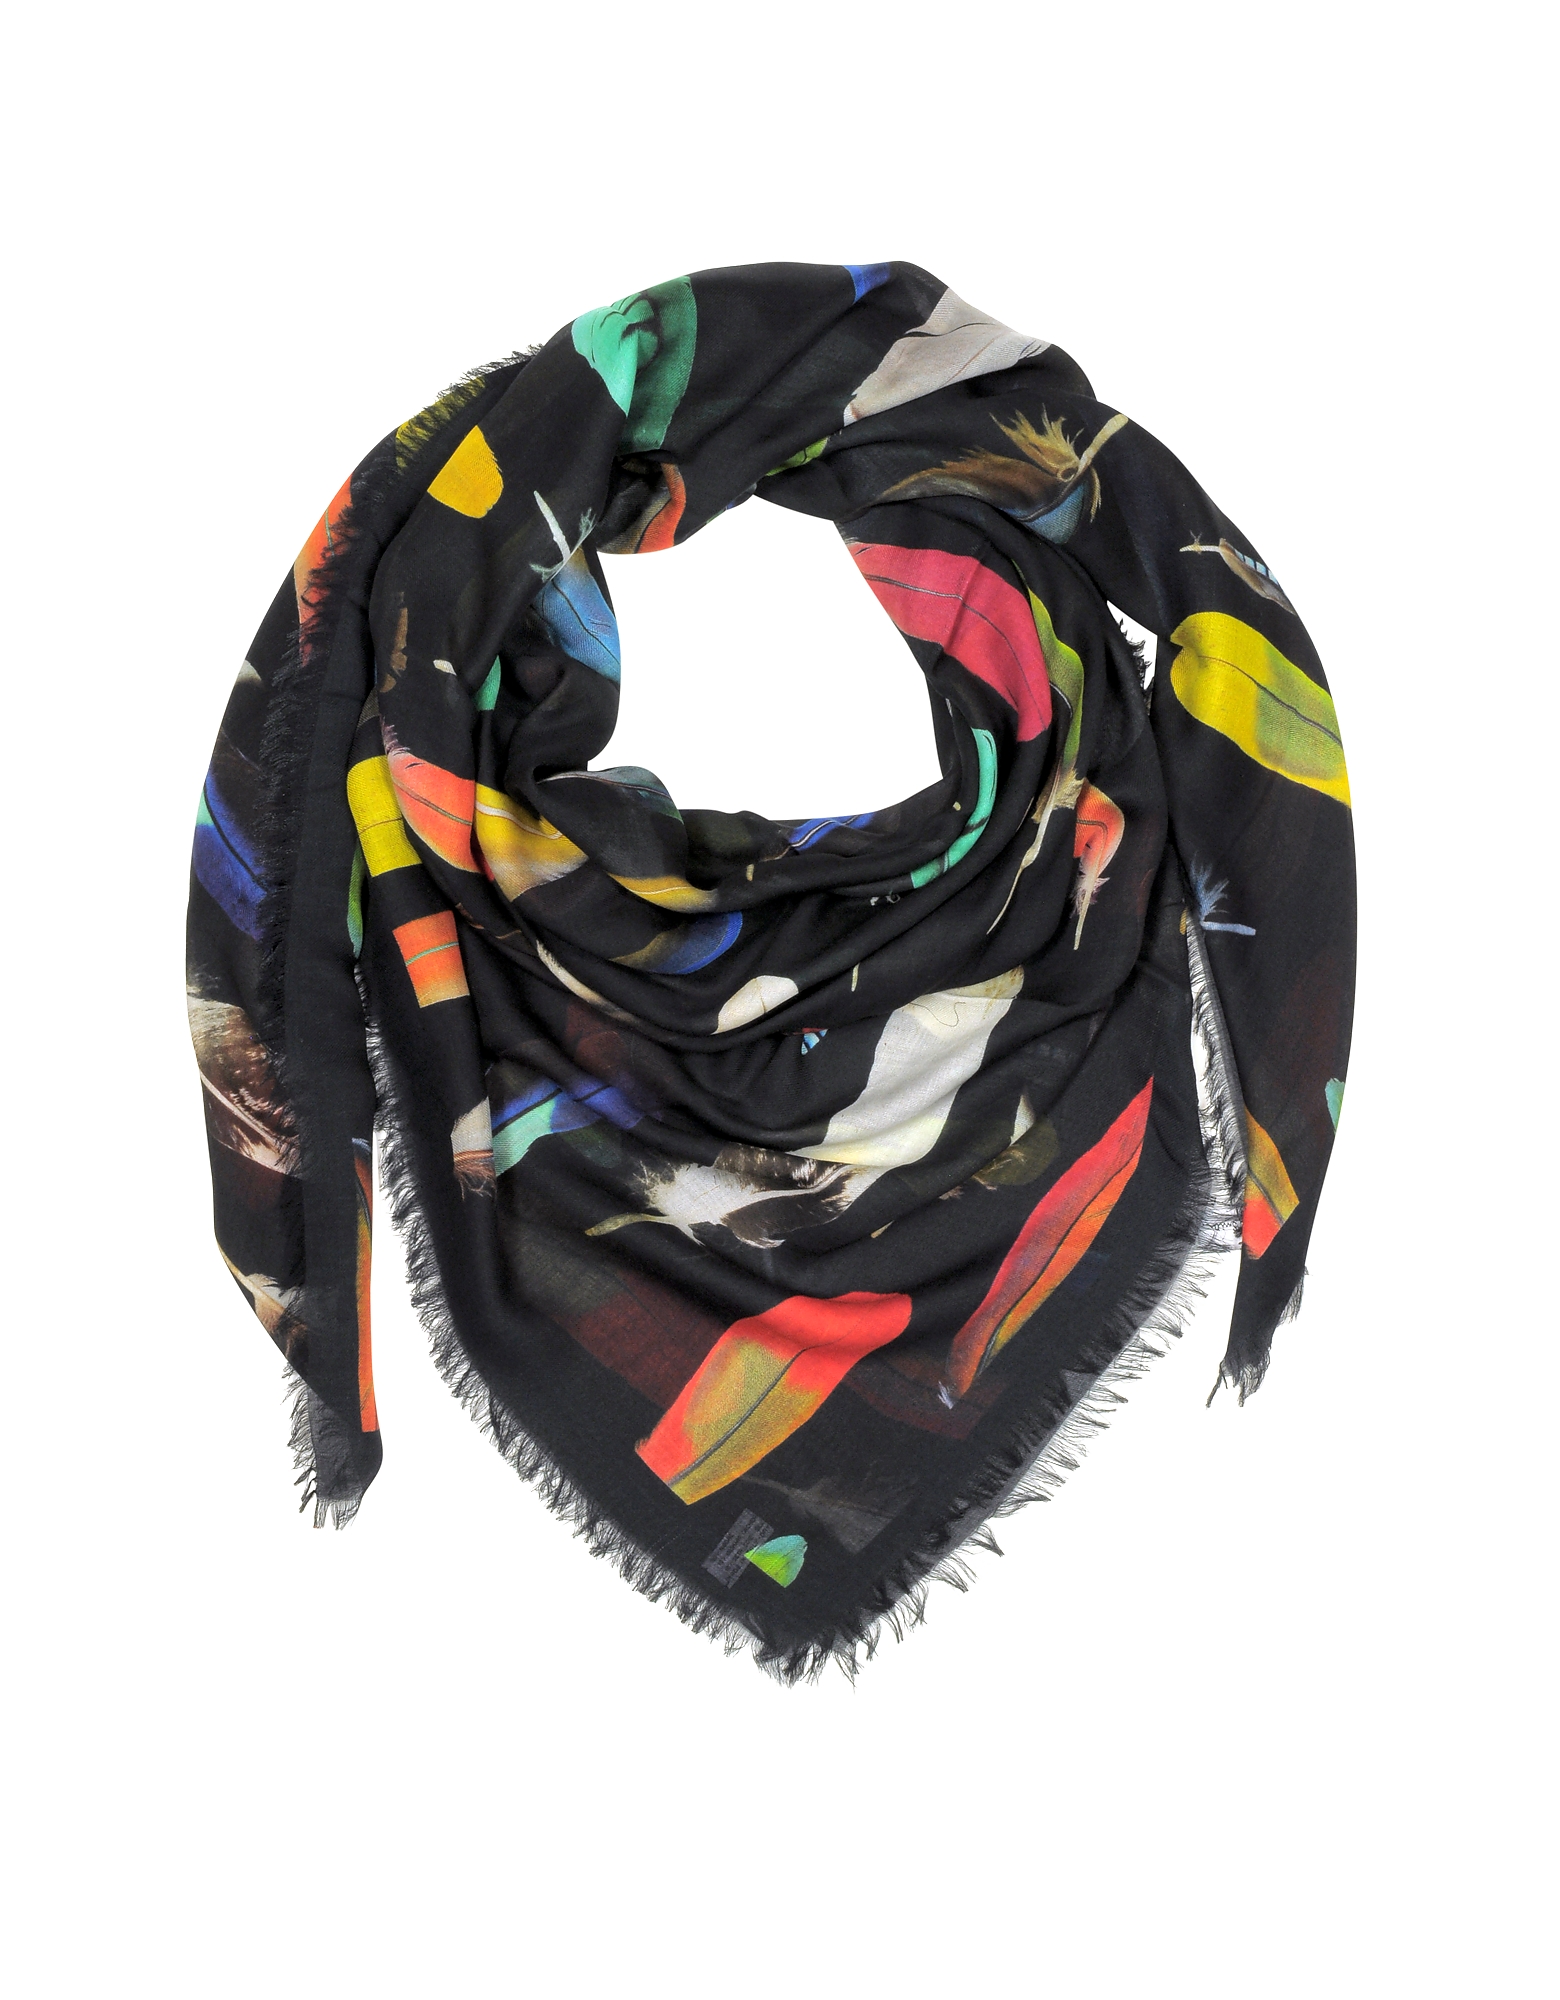 Paul Smith Feather Printed Modal, Silk and Cashmere Men's Wrap